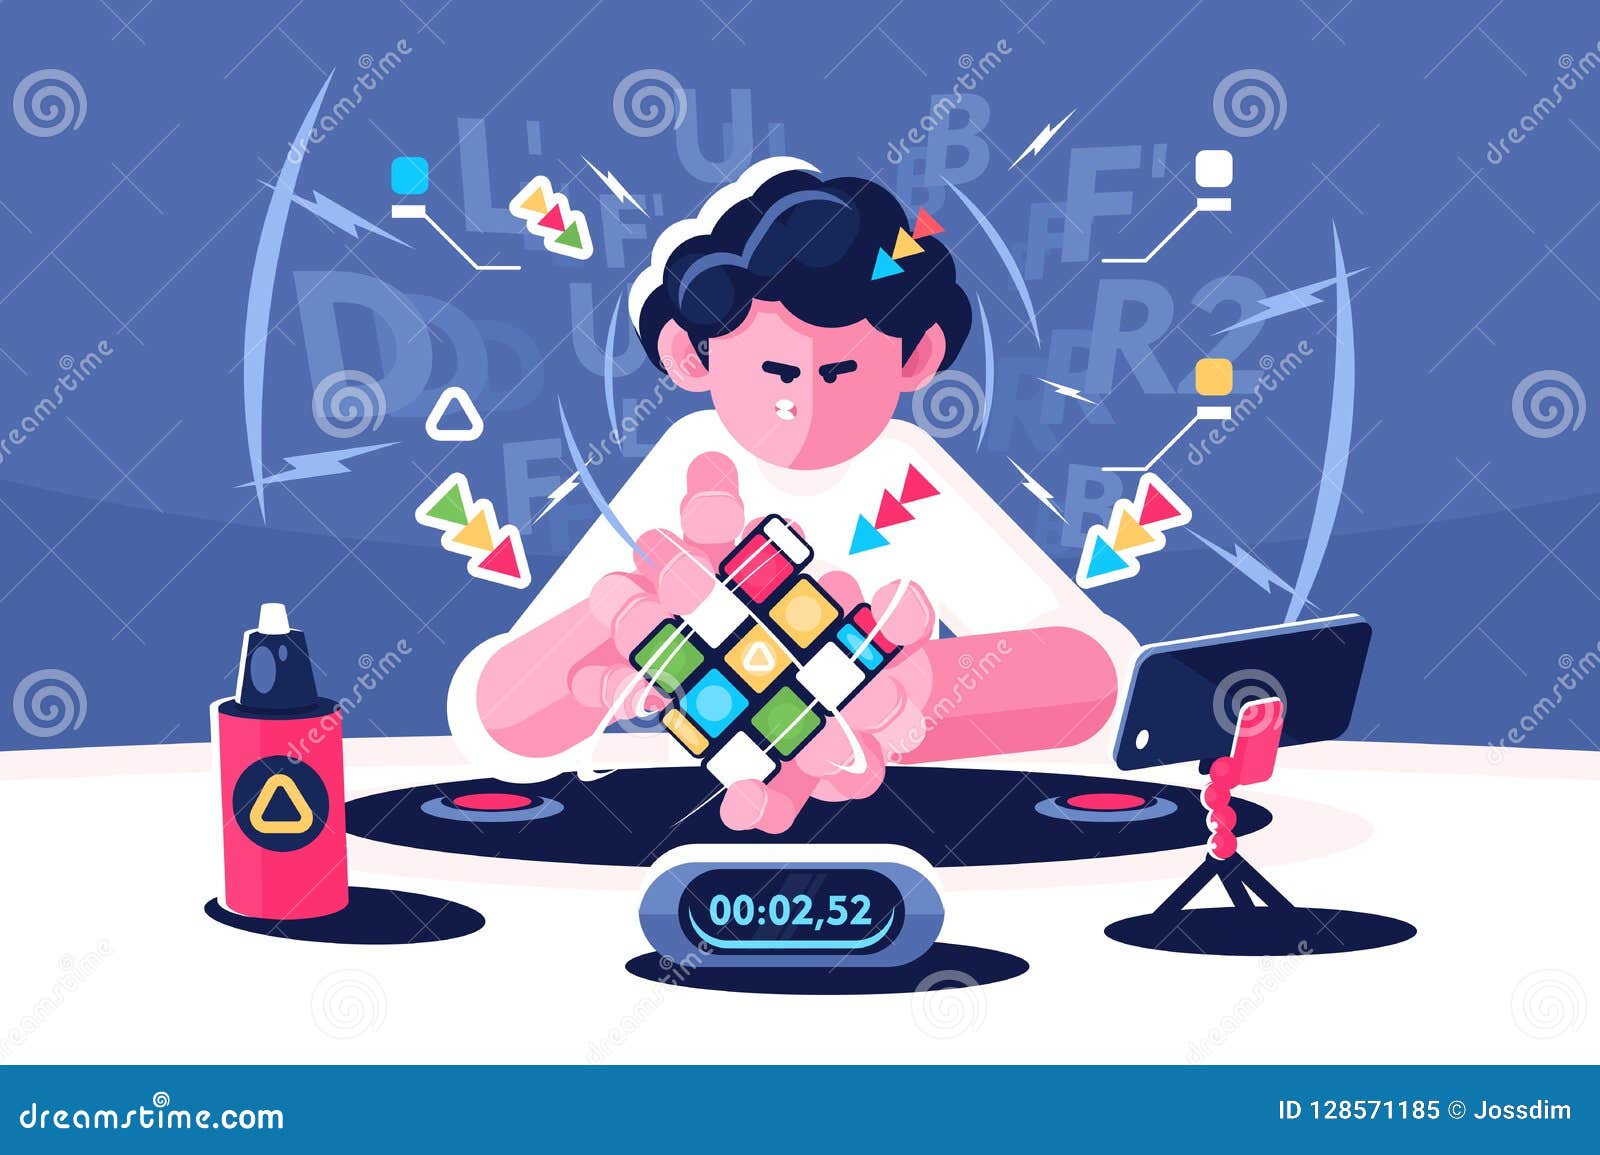 Man Collect Cube Timer Championship Concept Editorial Image - Illustration of inspiration: 128571185